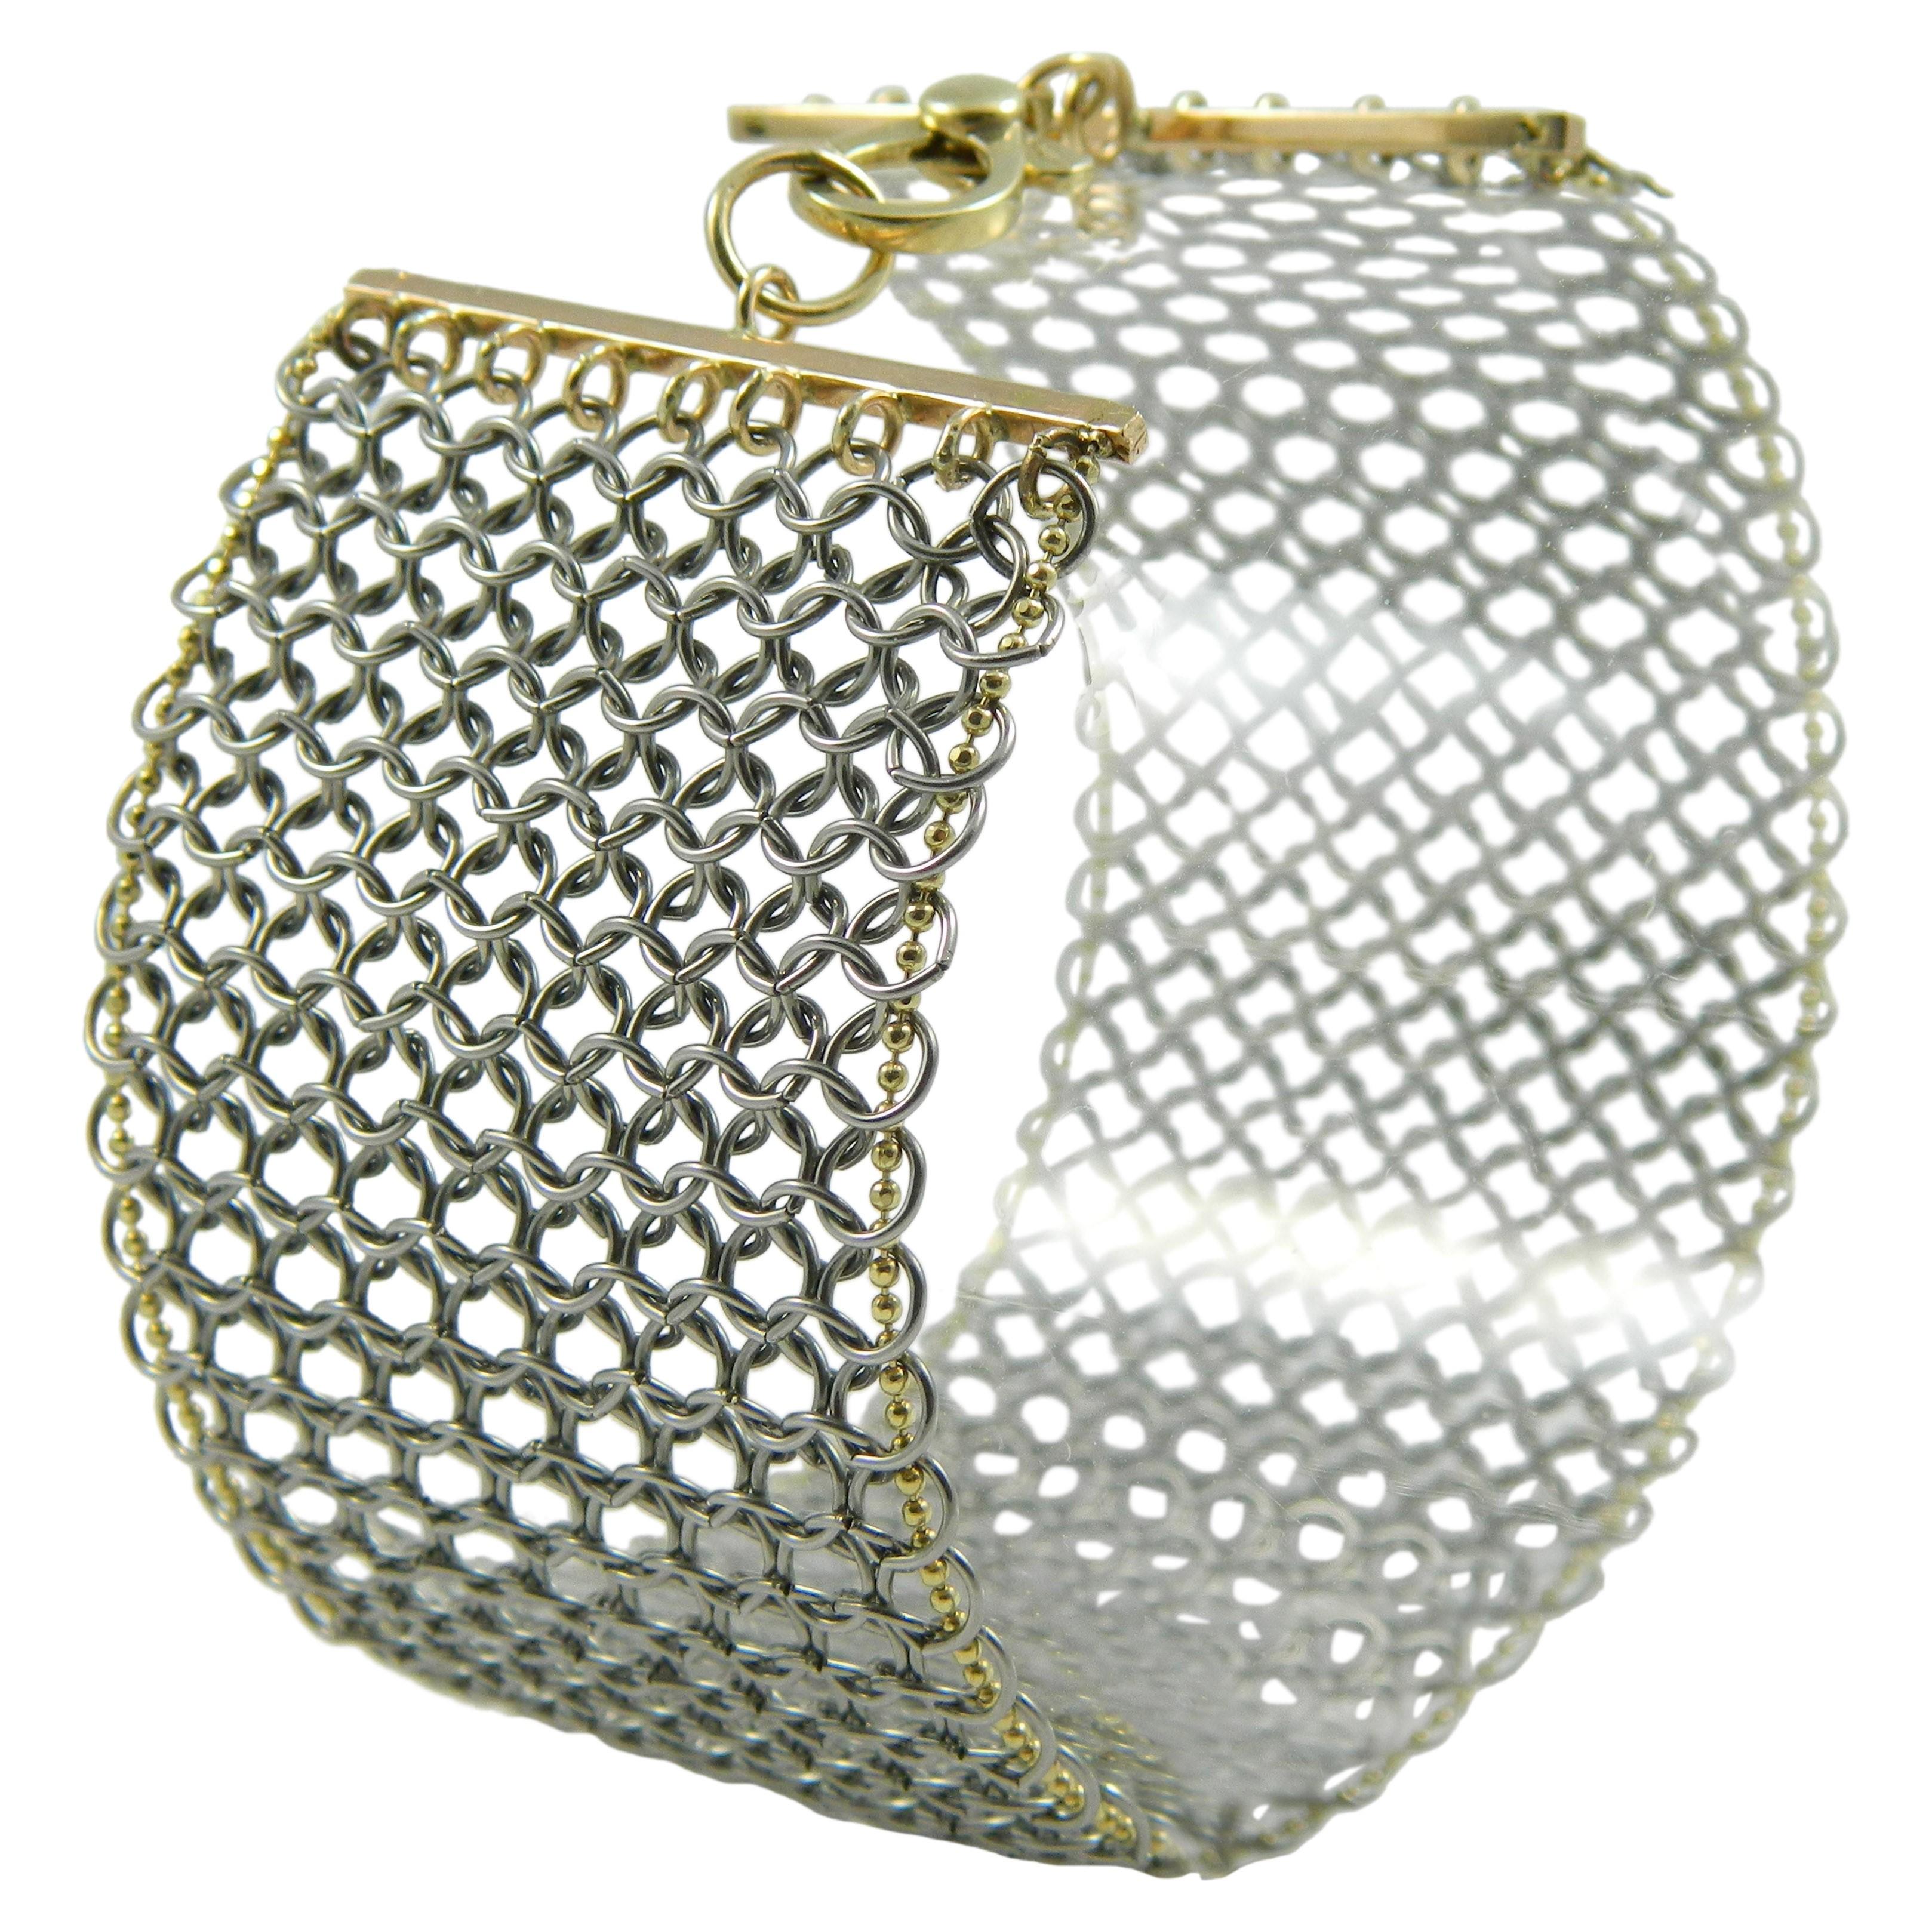 Contemporary Chainmail Bracelet in Stainless and 14K Chain woven into Perimeter with 14K Bars For Sale